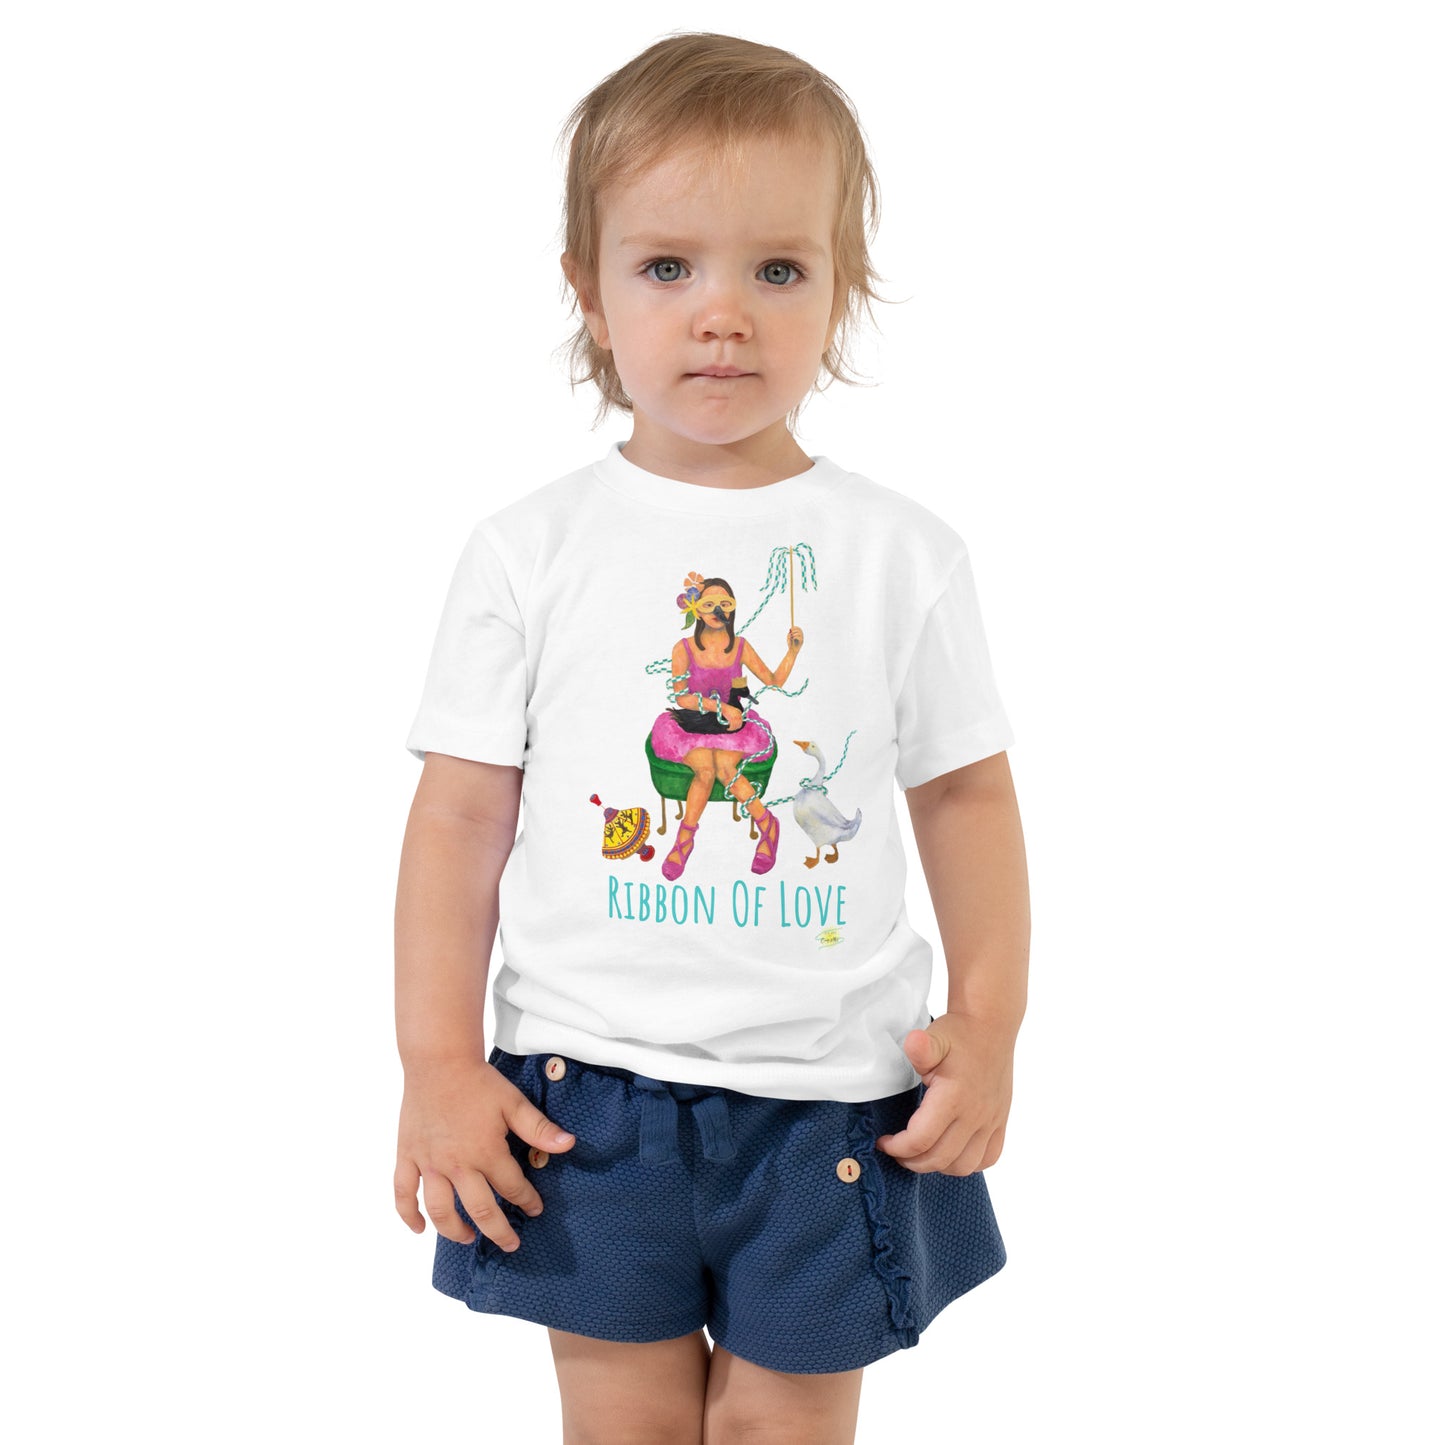 Duck Duck Goose and Three Dancing Moose Toddler Short Sleeve Tee ( Ribbon Of Love Collection)